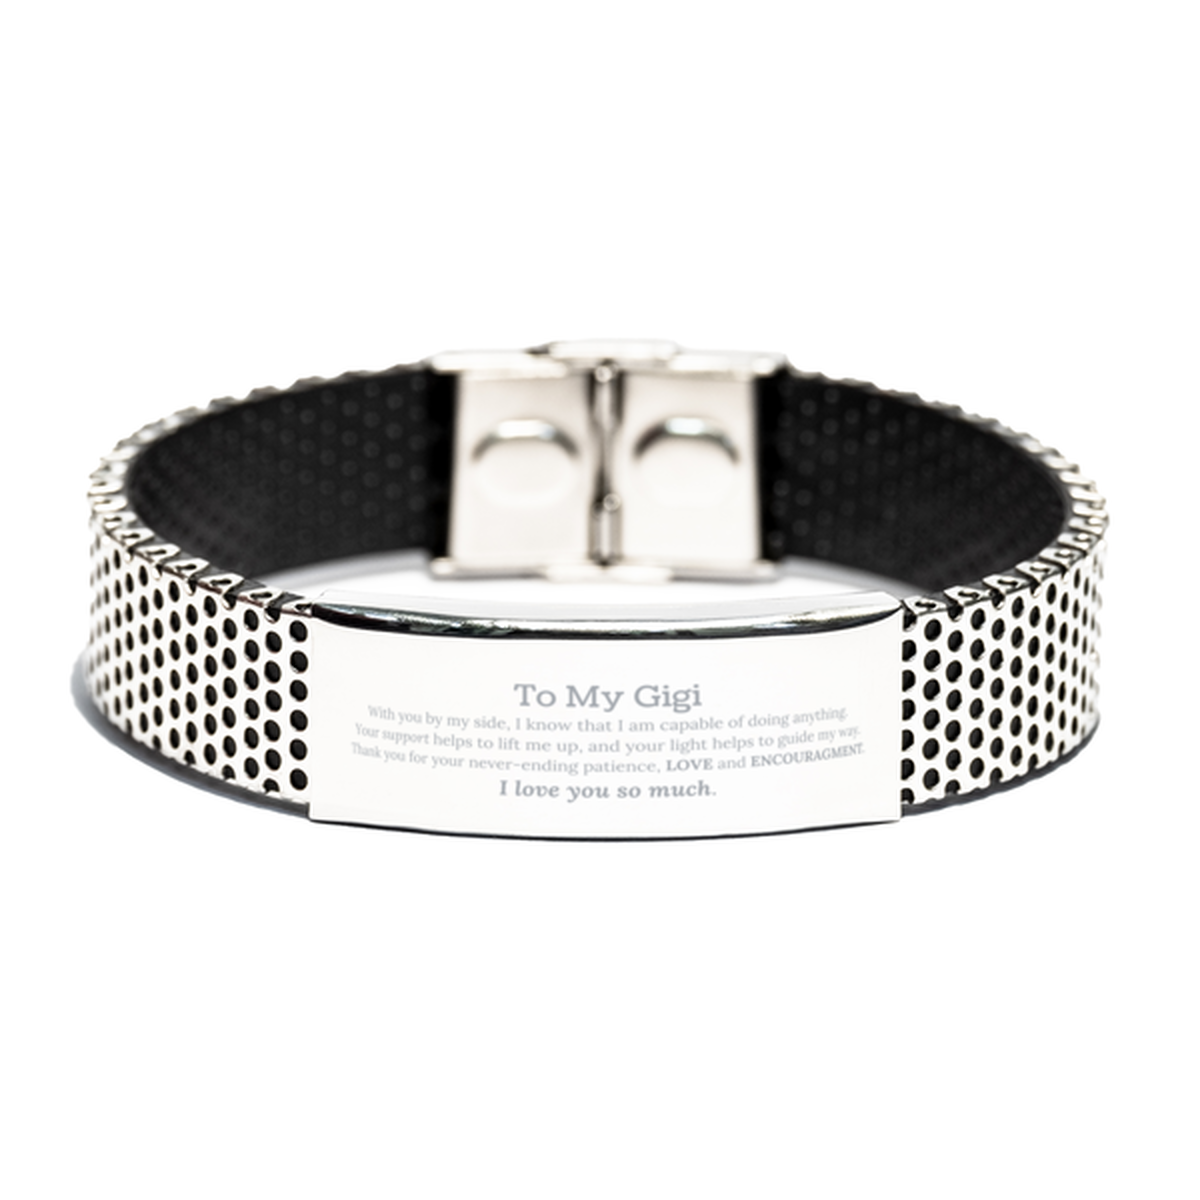 Appreciation Gigi Stainless Steel Bracelet Gifts, To My Gigi Birthday Christmas Wedding Keepsake Gifts for Gigi With you by my side, I know that I am capable of doing anything. I love you so much